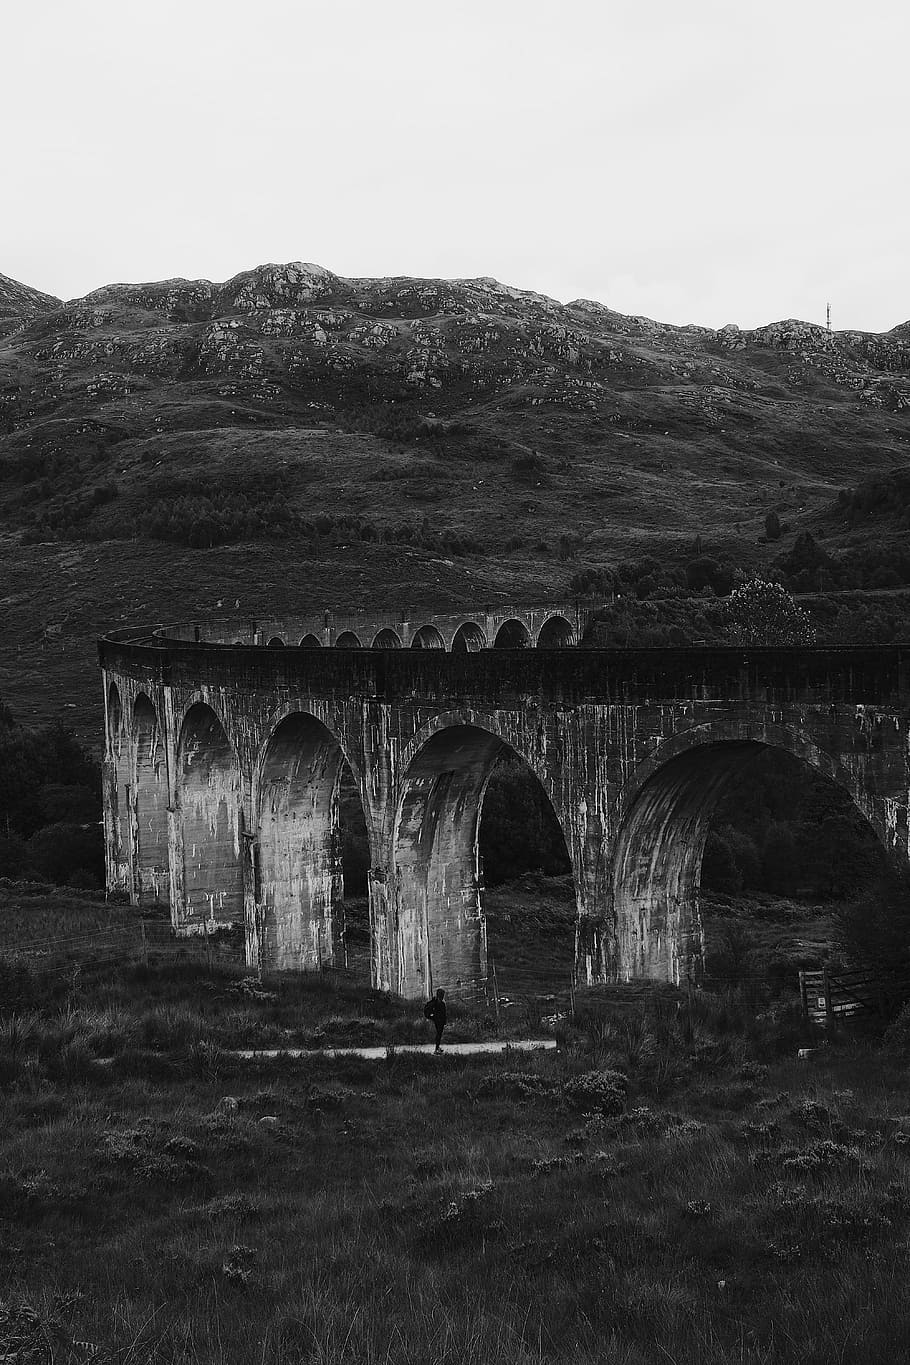 Glenfinnan Viaduct in Black and White, grayscale photo of man standing under concrete building near hills